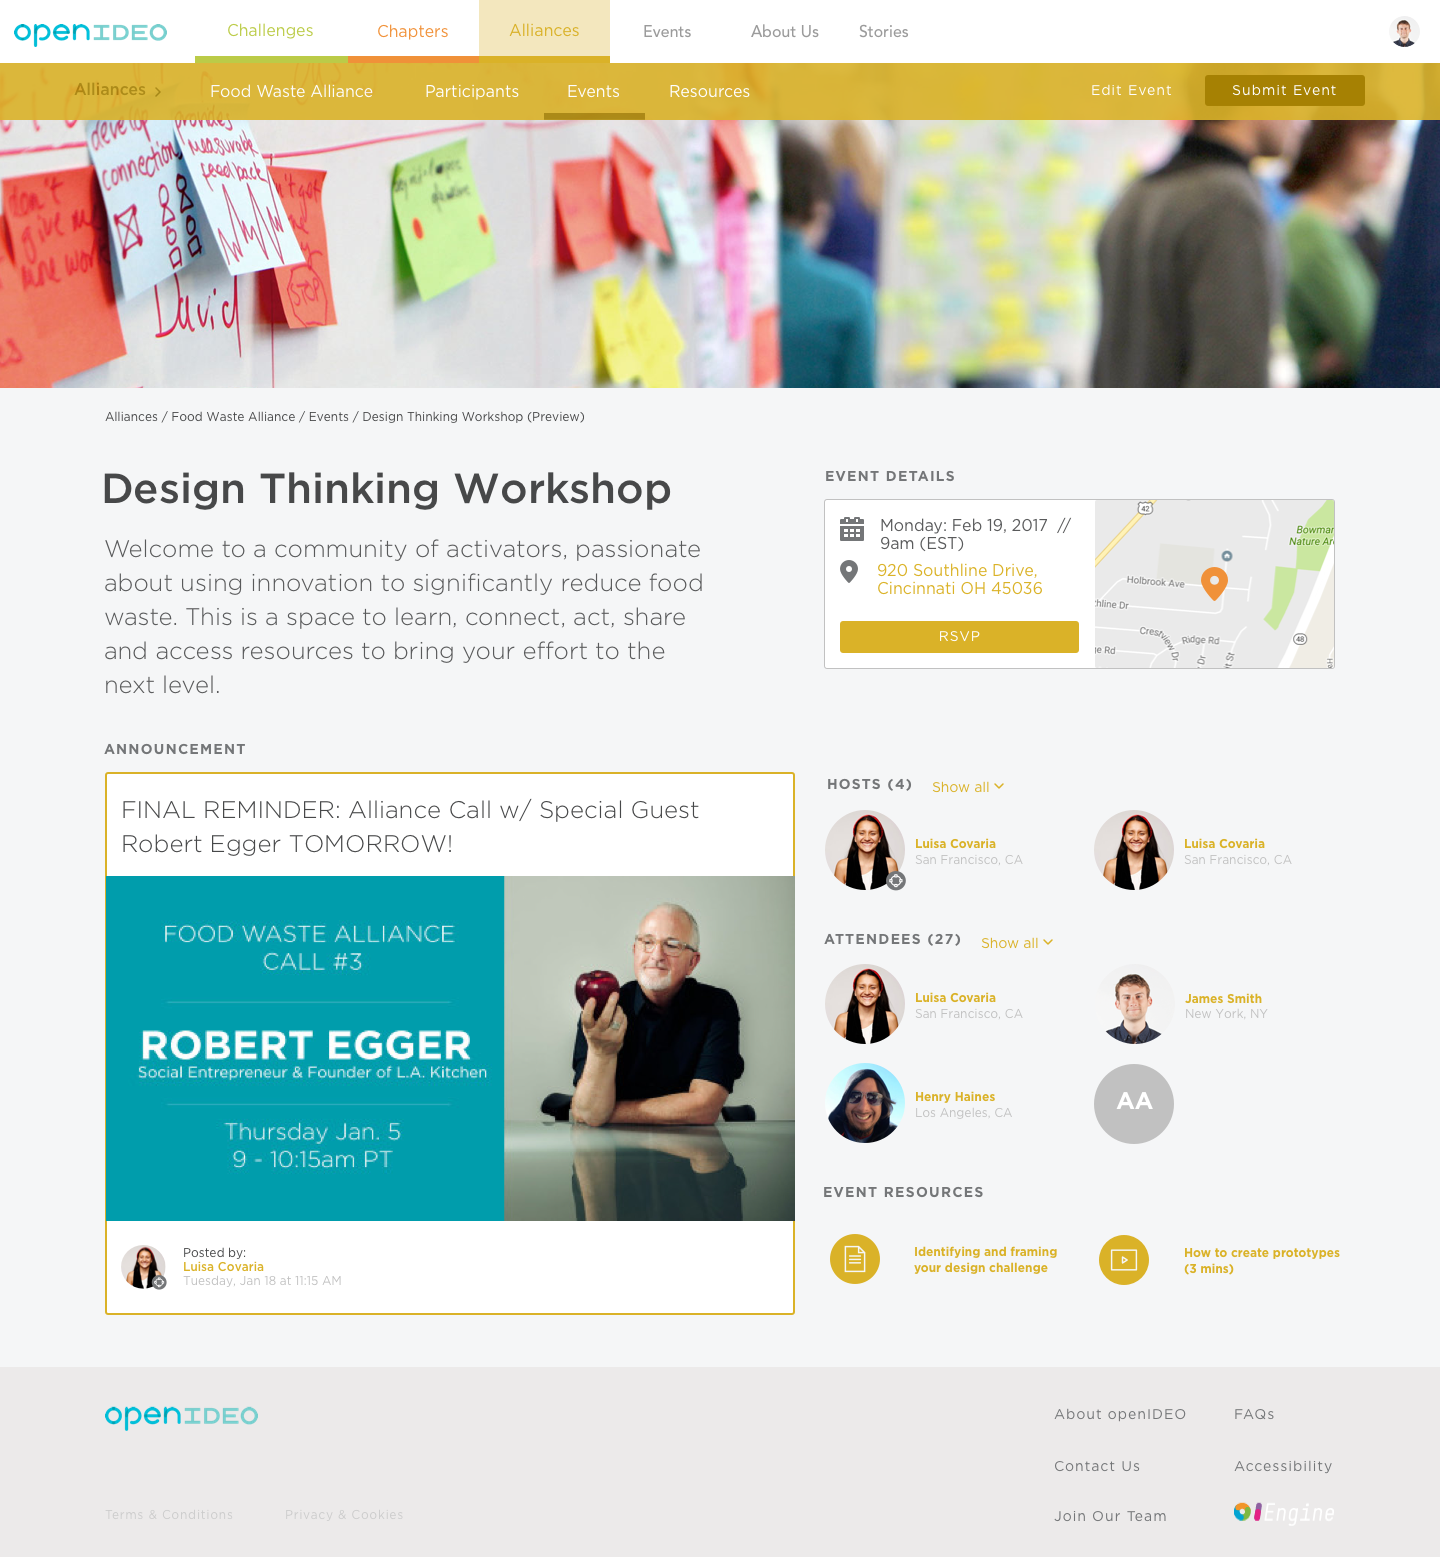 Design Thinking Workshop Event Preview Page with Map